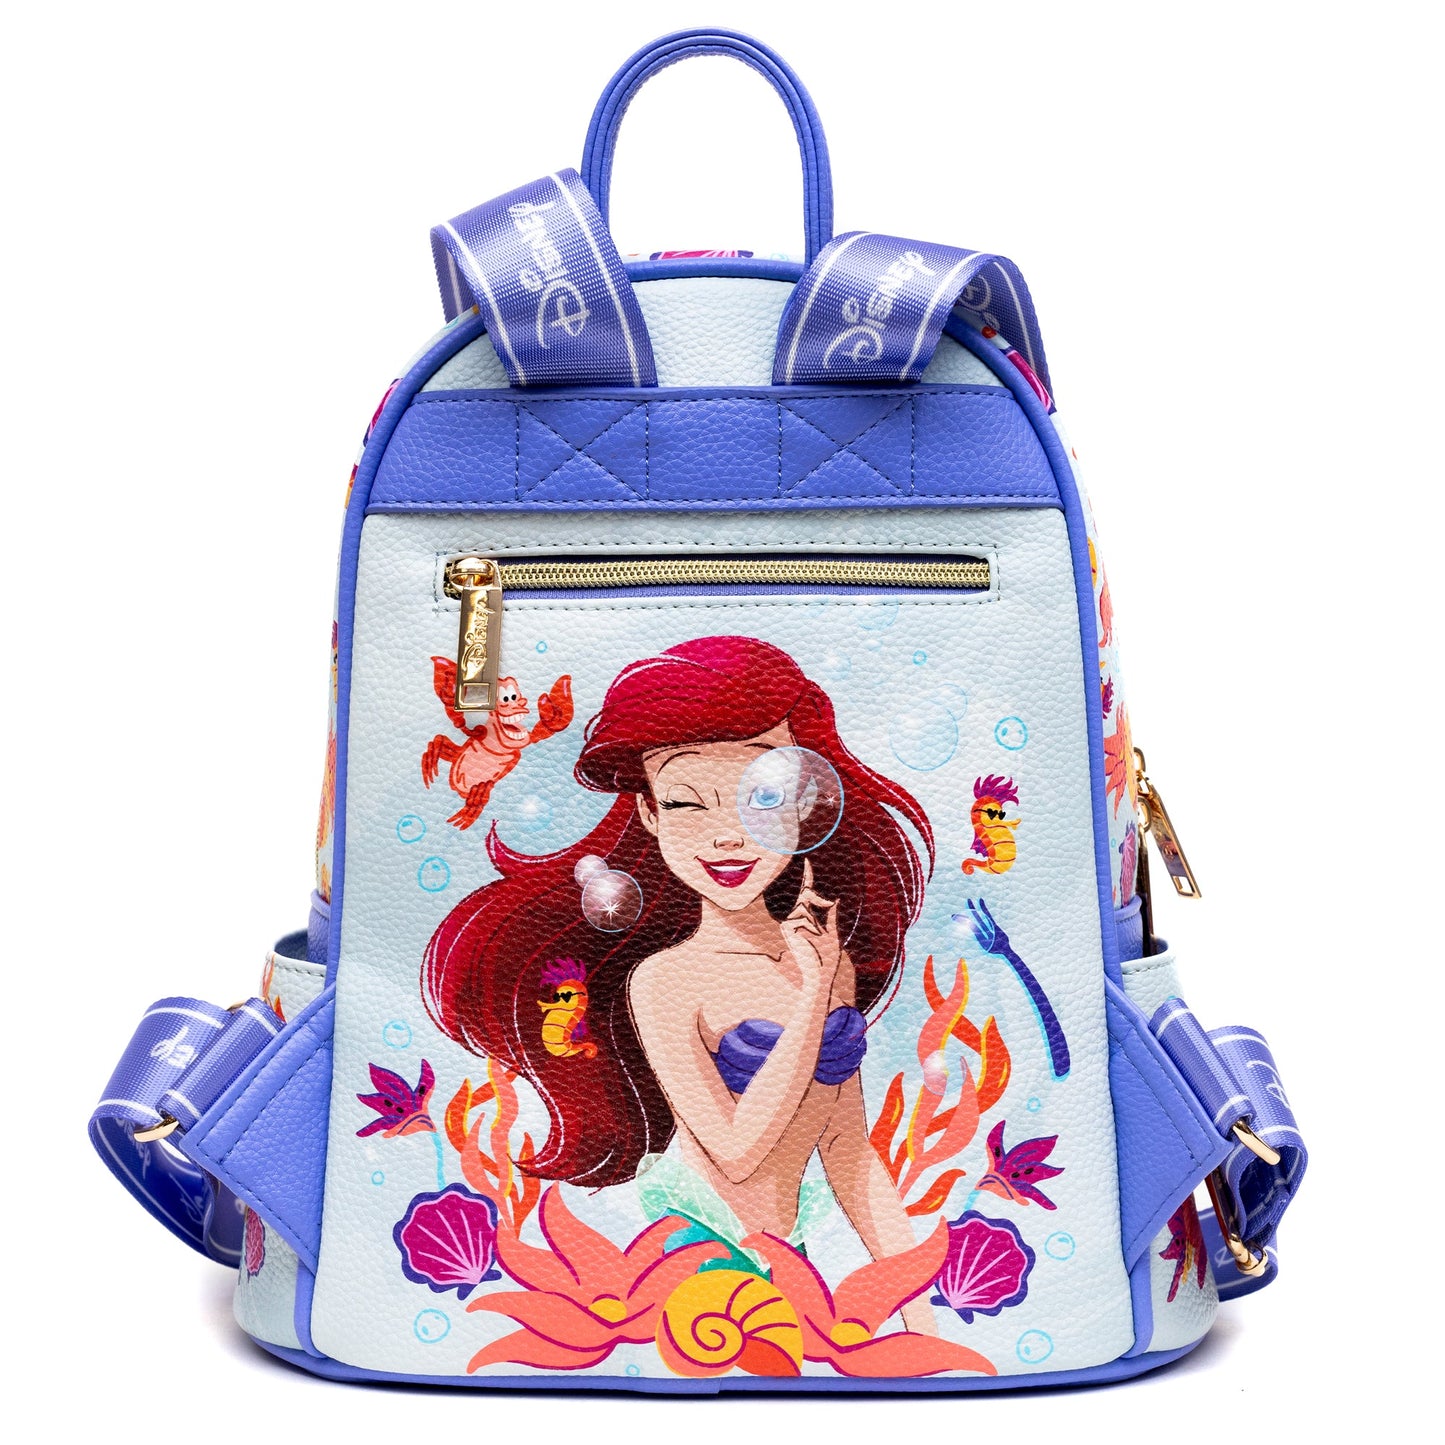 Exclusive Limited Edition-Little Mermaid Vegan Leather Backpack